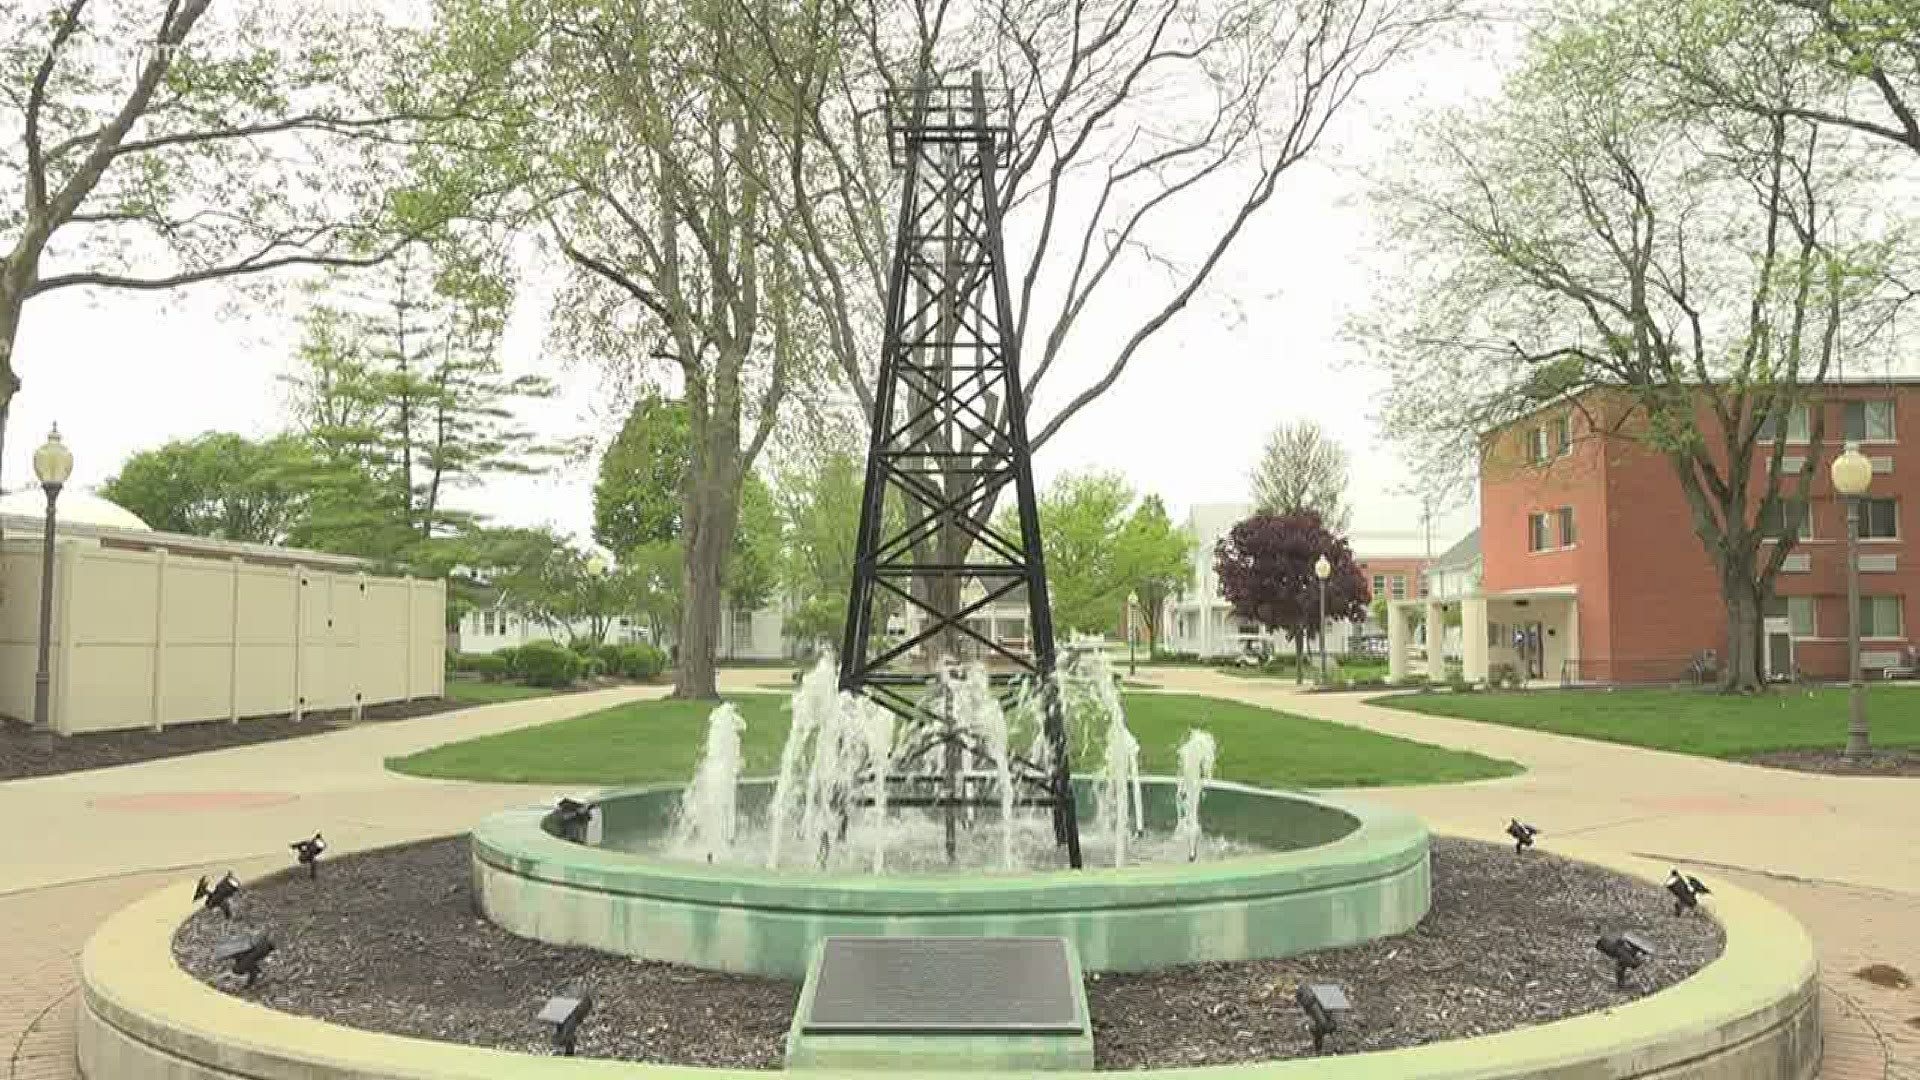 Because right now, we need it: The sights and sounds of nature at the University of Findlay Oil Derrick Fountain, captured by WTOL 11 reporter Jon Monk.